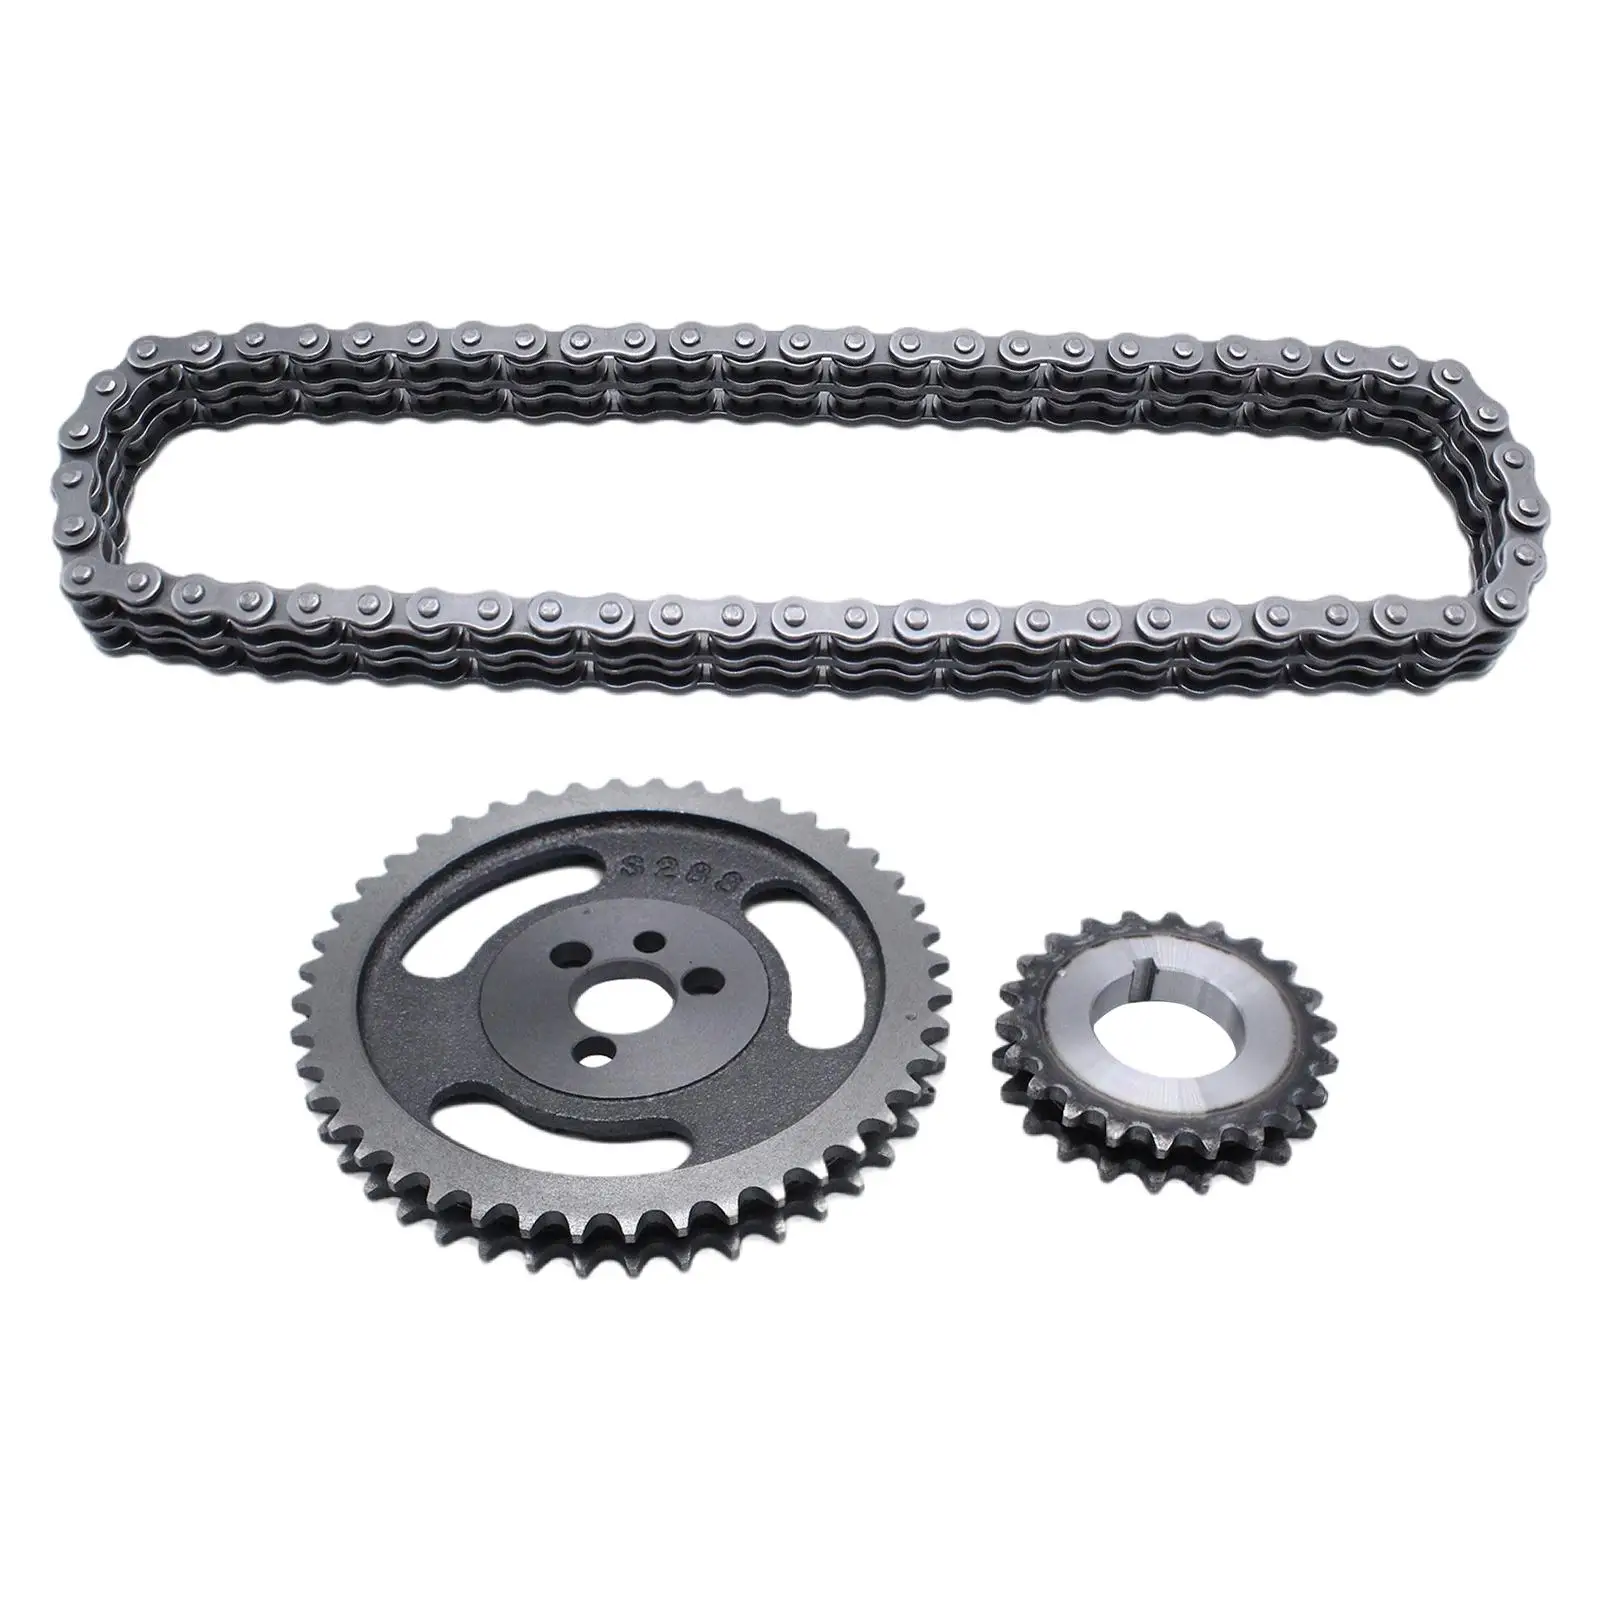 Double Roller Timing Chain -3023K 7439-1203 Double Row Fits for Sbc 5.7L 350 383 400 327